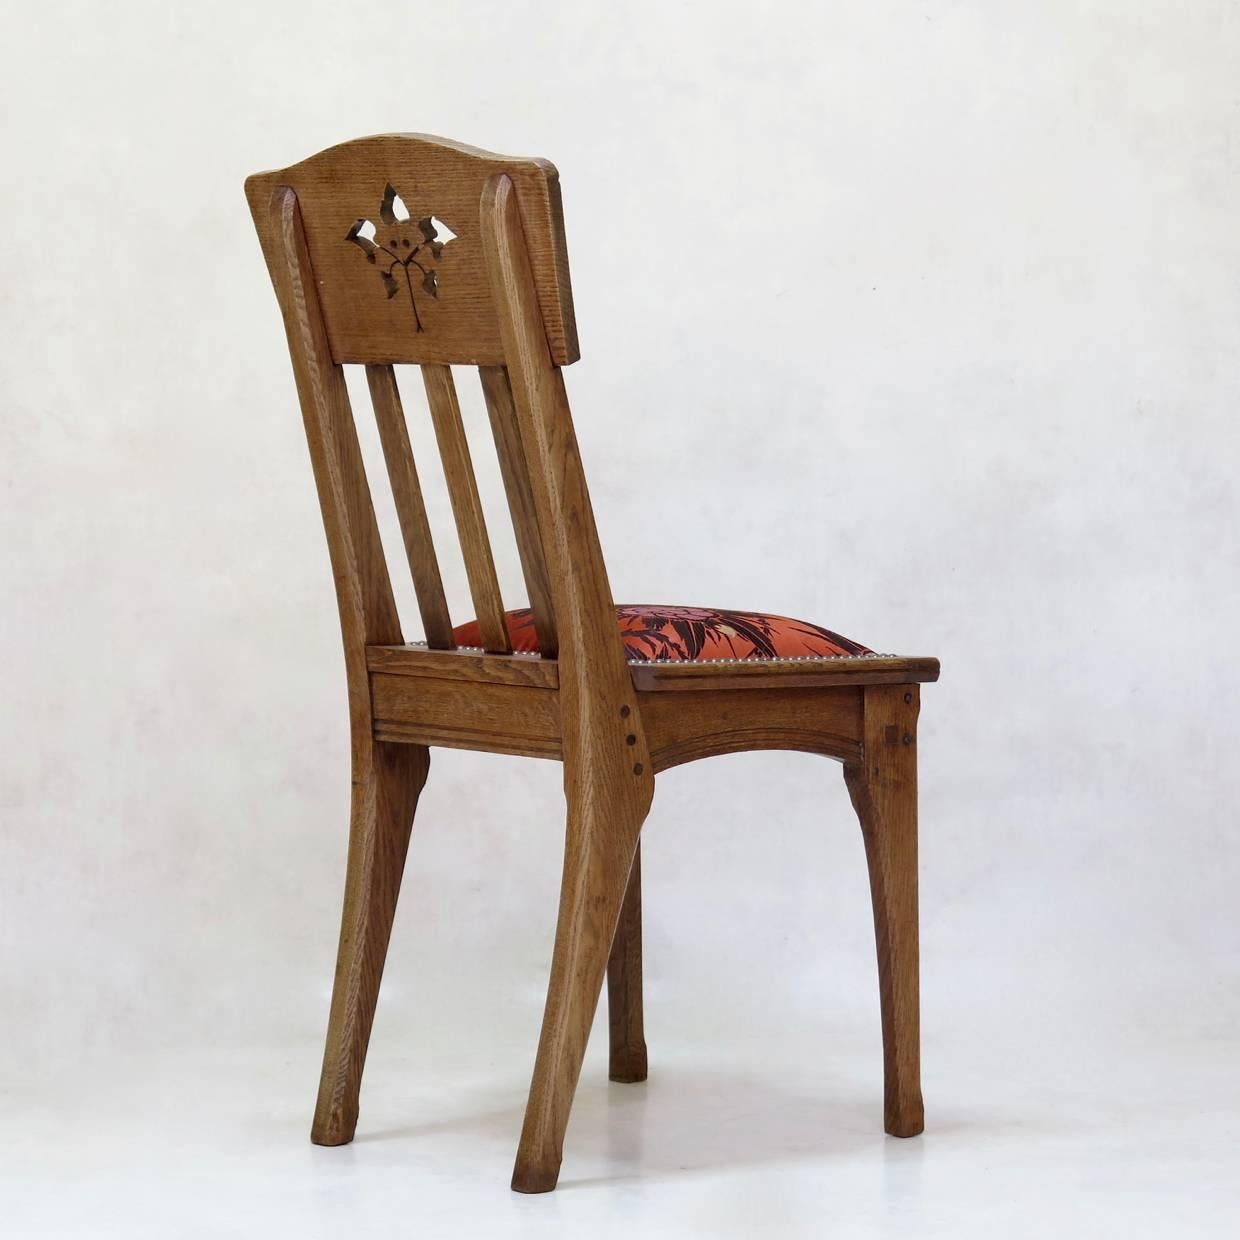 French Six Arts & Crafts Style Oak Chairs by Léon Jallot, France, circa 1910